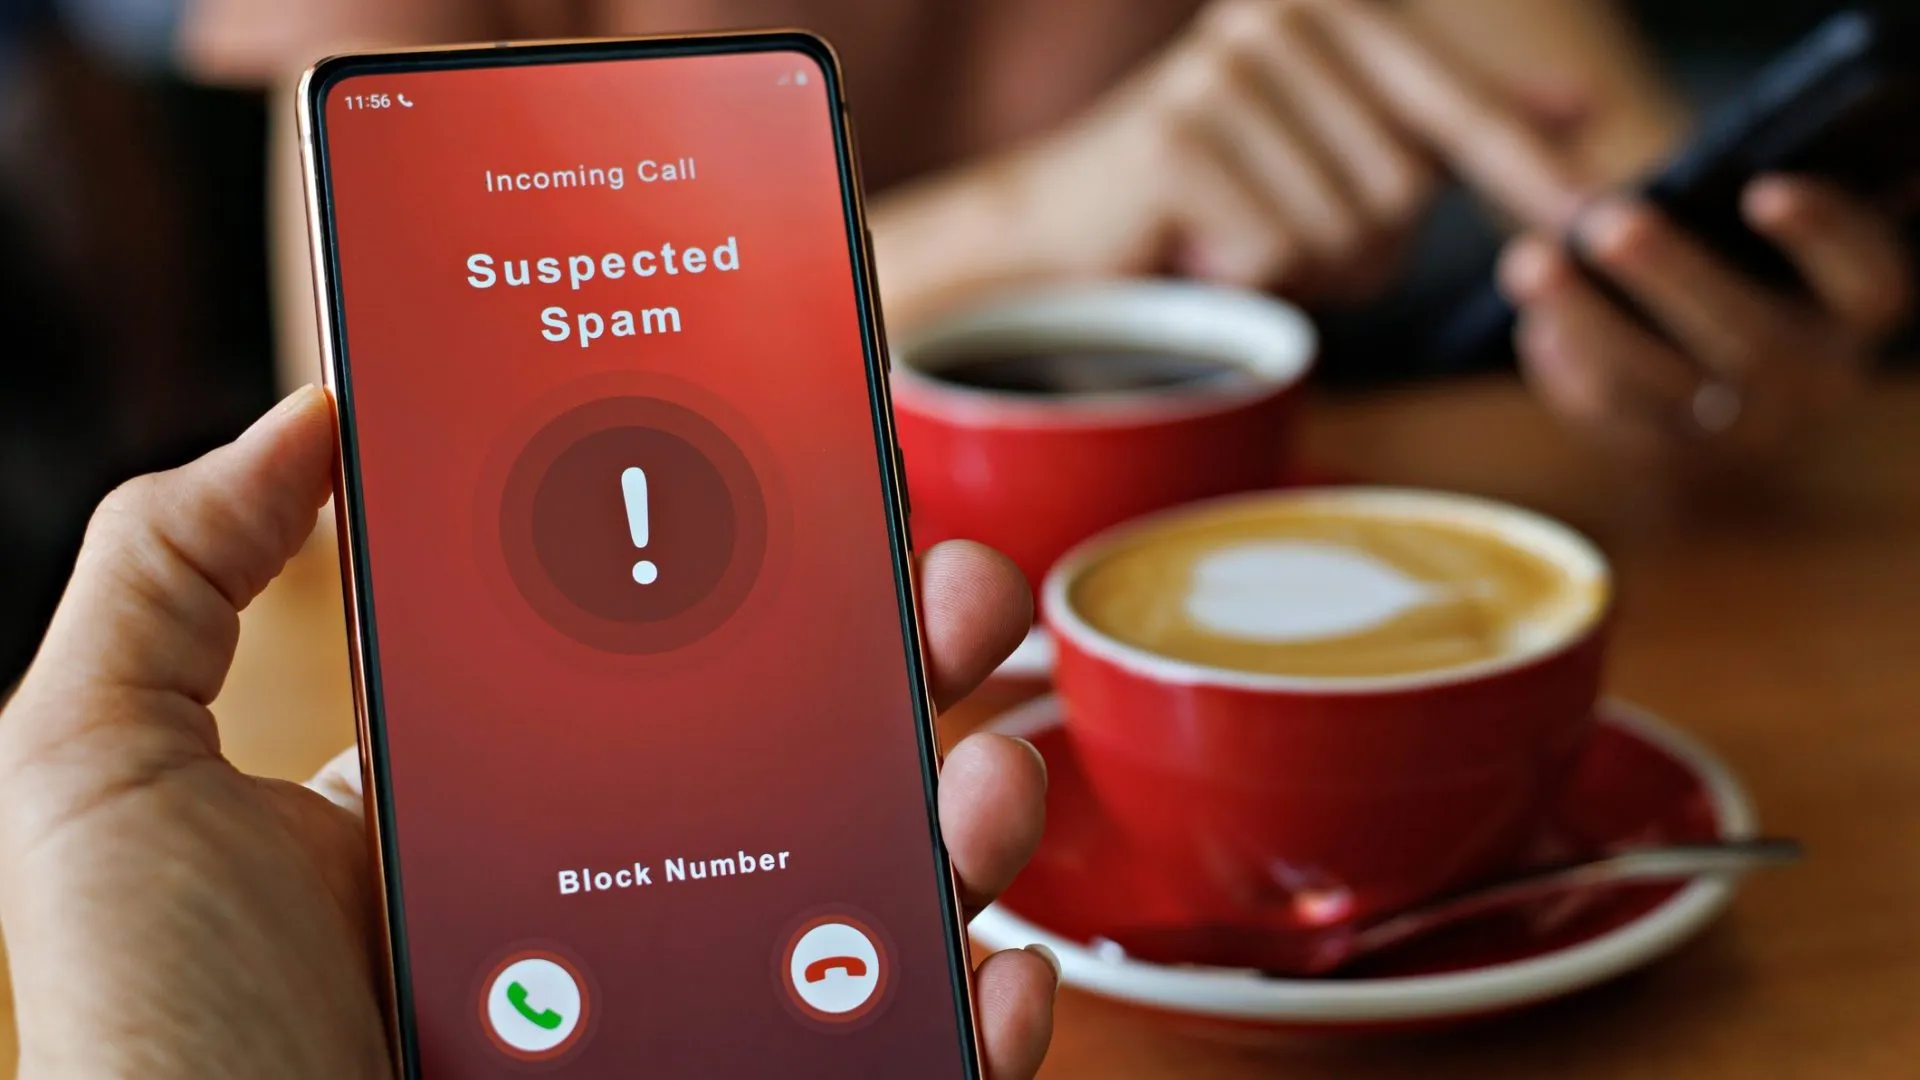 A man receiving an incoming suspected spam call on his phone.